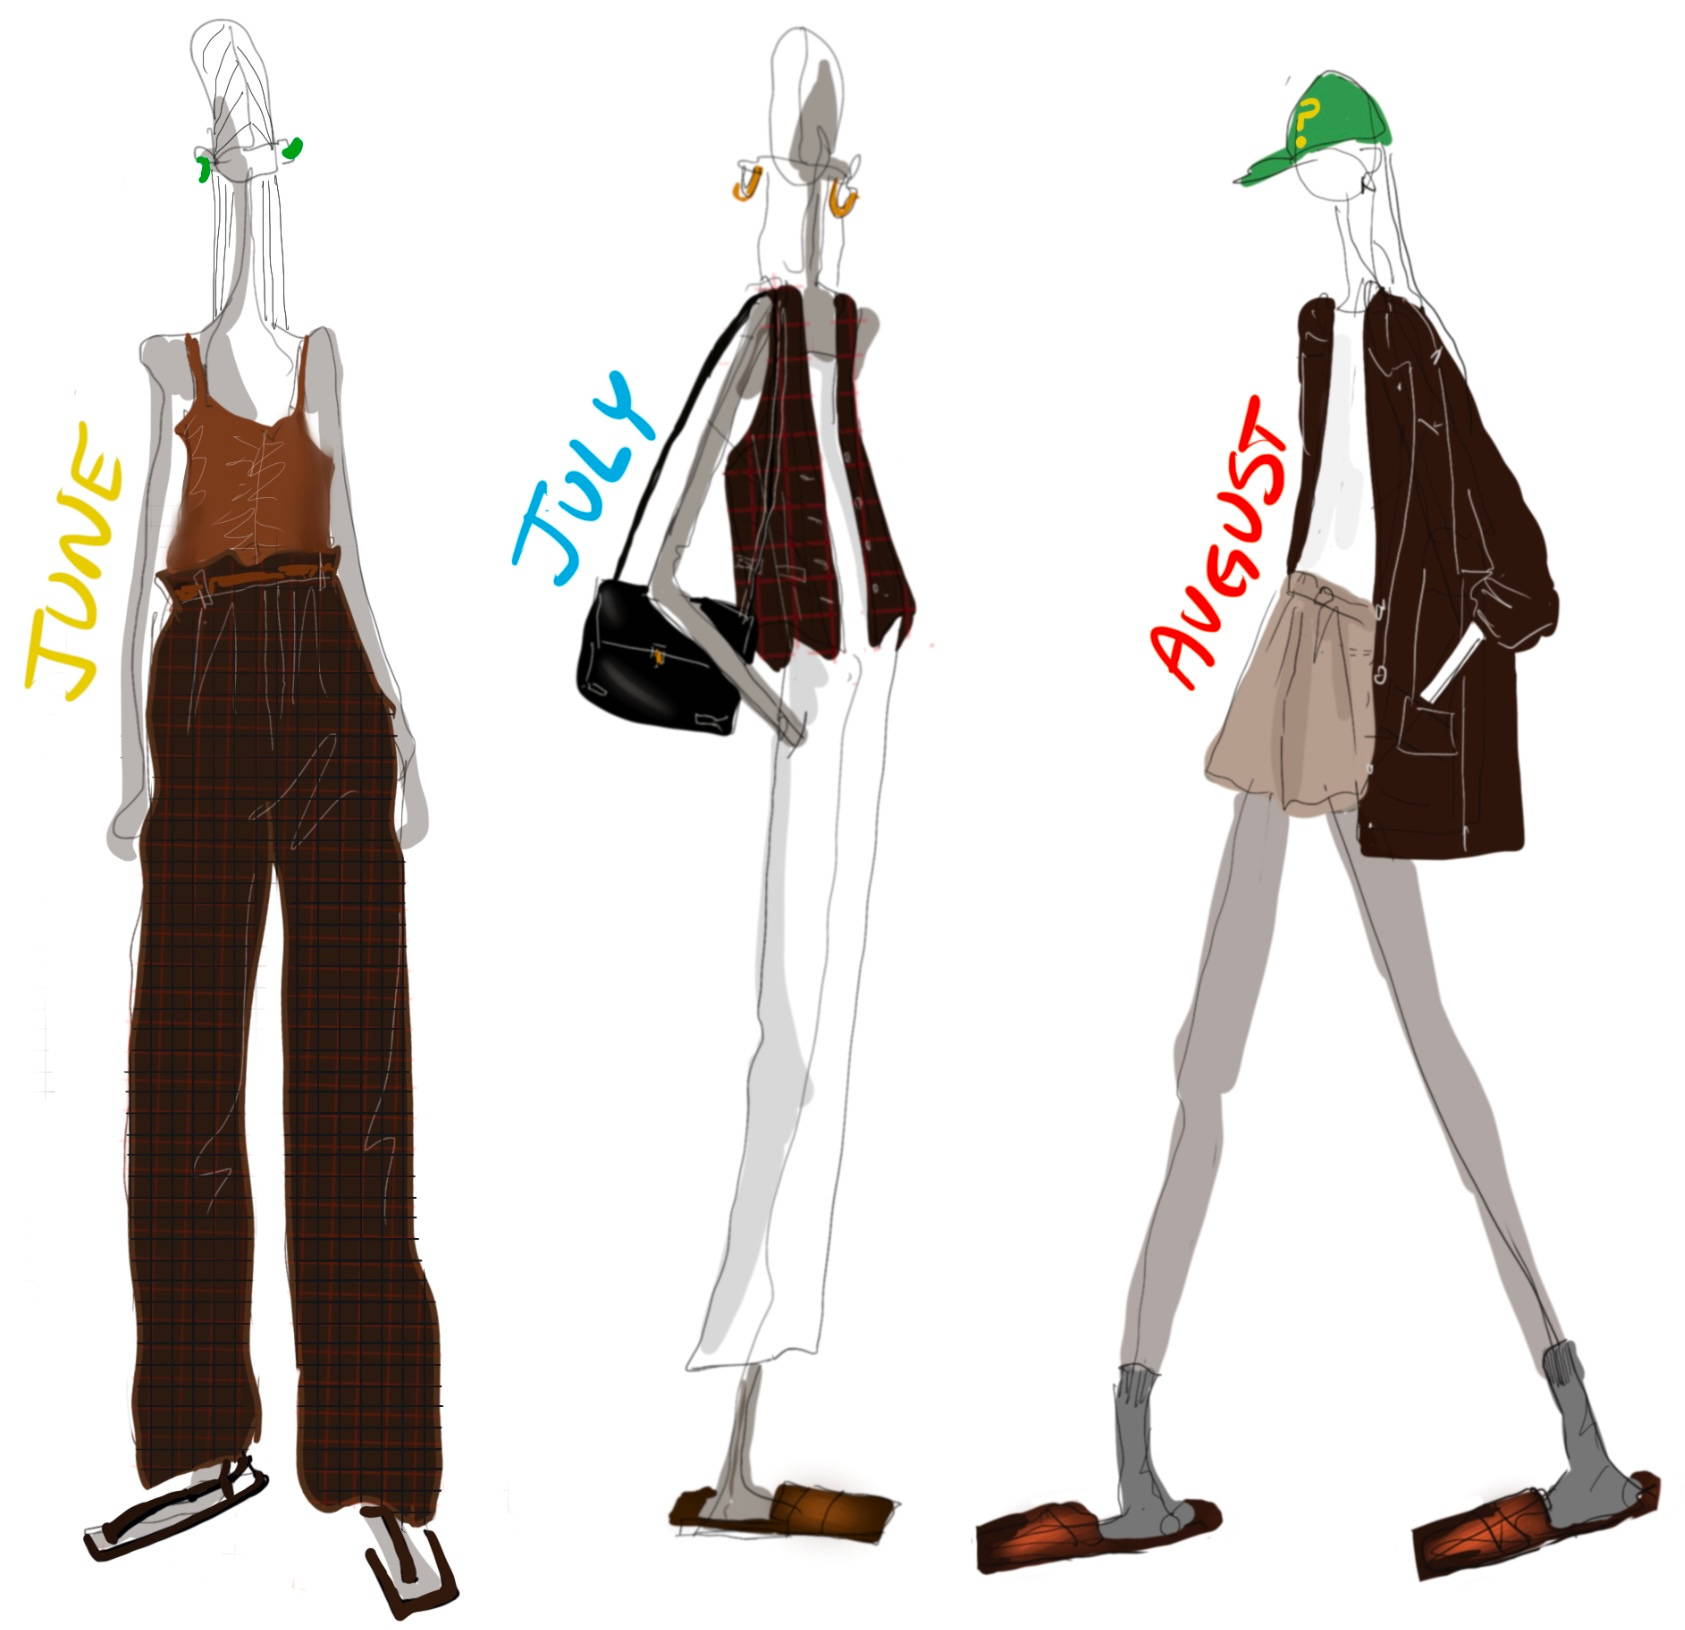 illustration of three women wearing the suit in june, july, and august